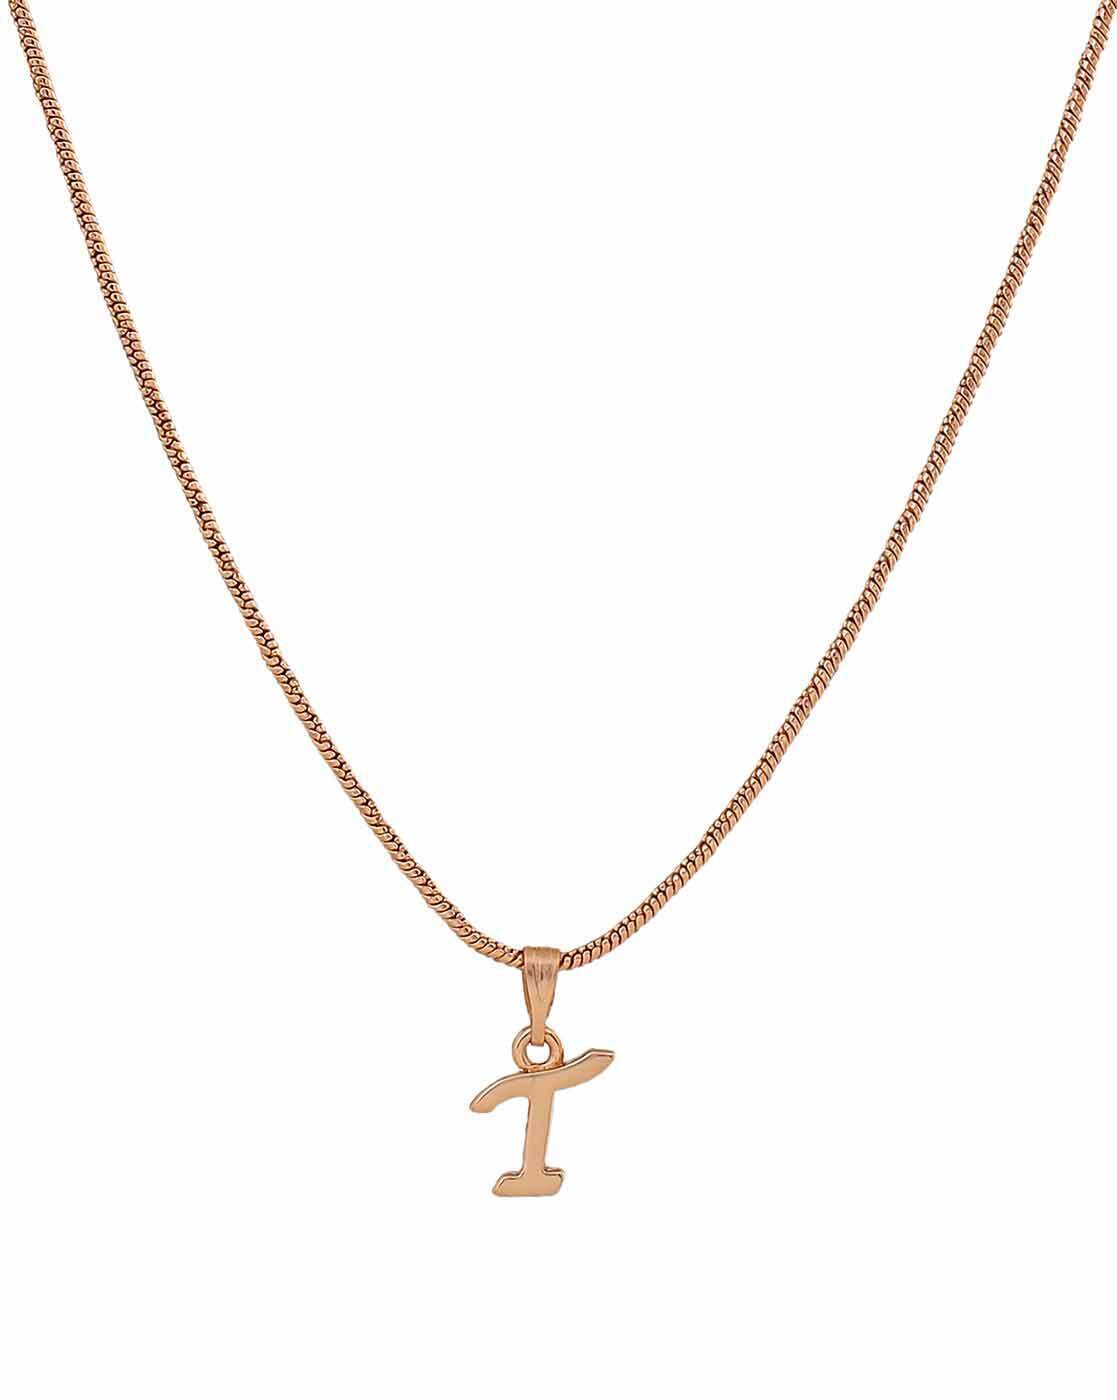 Buy Tipsyfly White, Crystal & Gold Initial Necklace - T Online